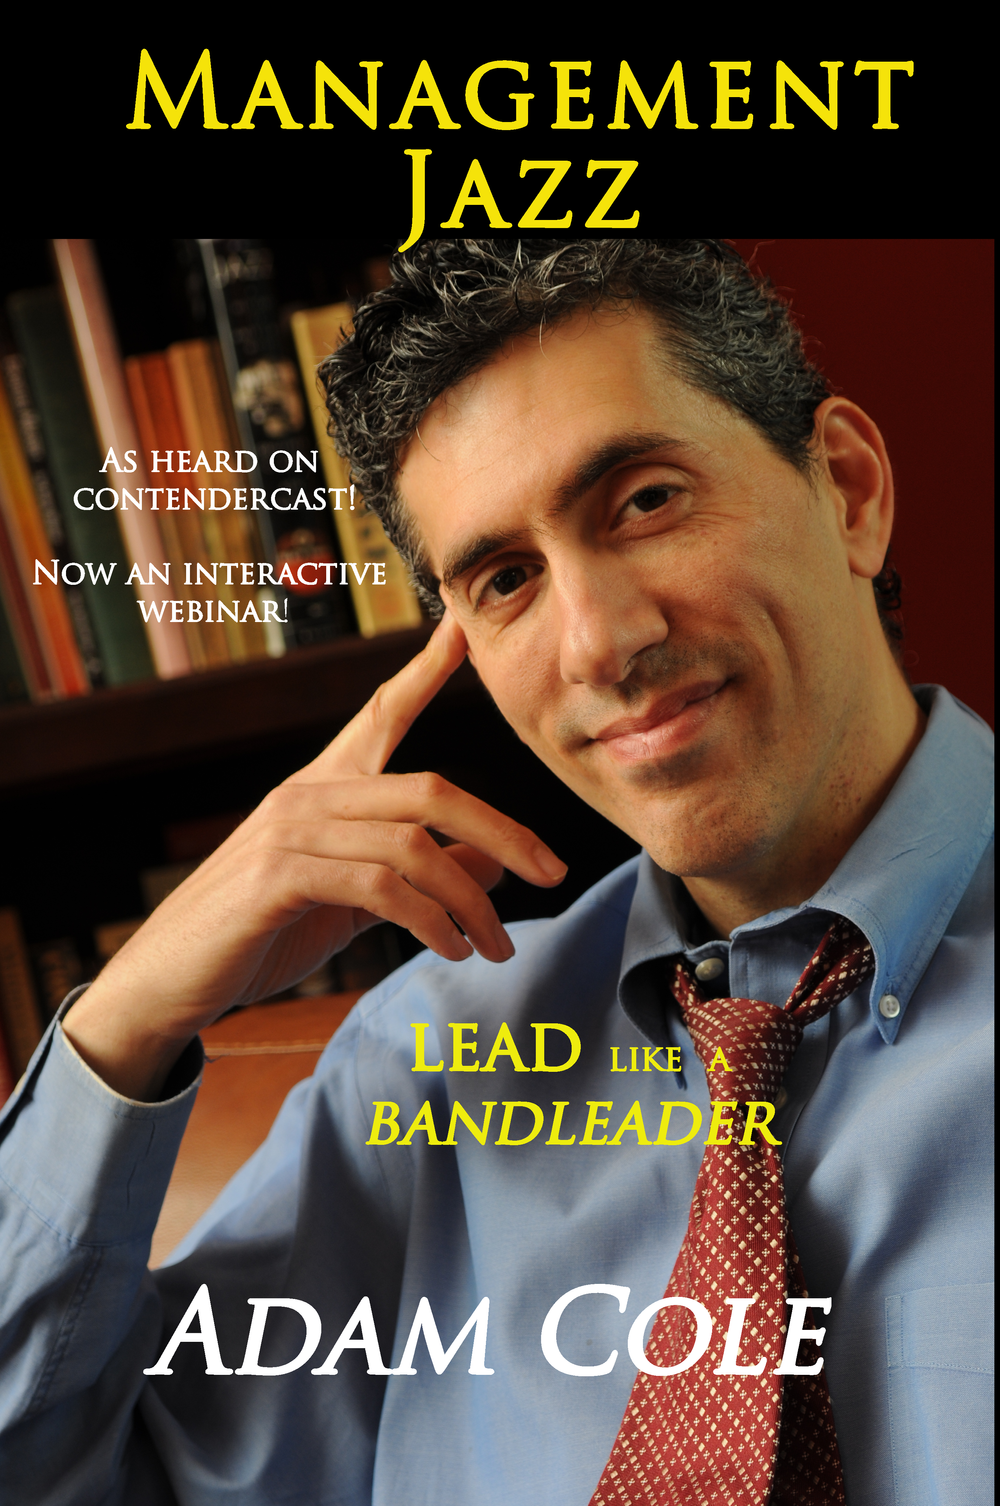 Having trouble managing your team?  What do bandleaders know that you need to know?  This book gets to the point so you can get the results you deserve!